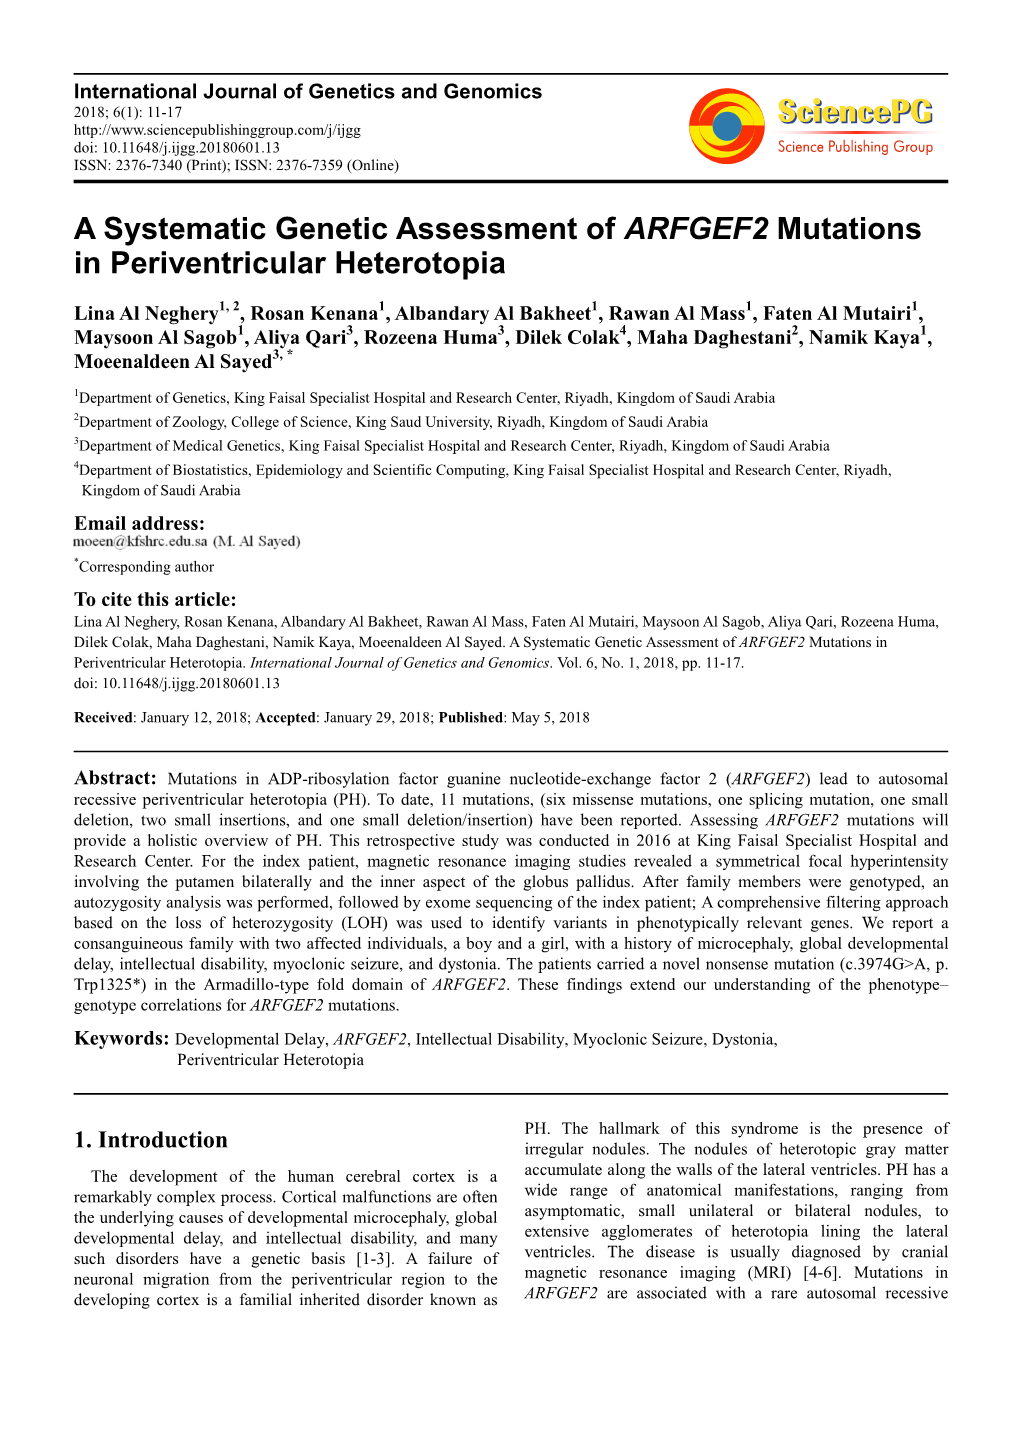 A Systematic Genetic Assessment of ARFGEF2 Mutations in Periventricular Heterotopia